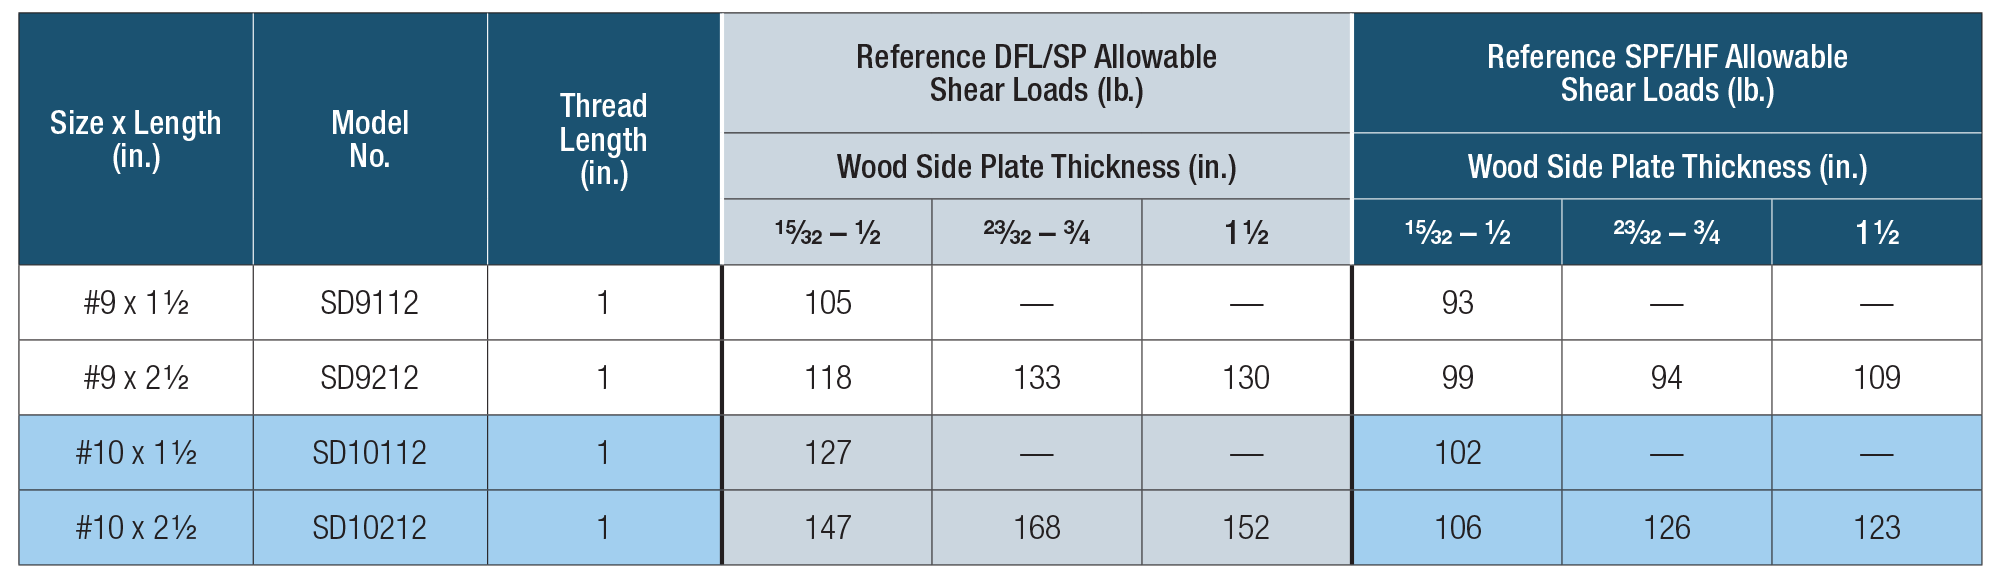 SD Connector Screw - Allowable Shear Loads for Wood Connections